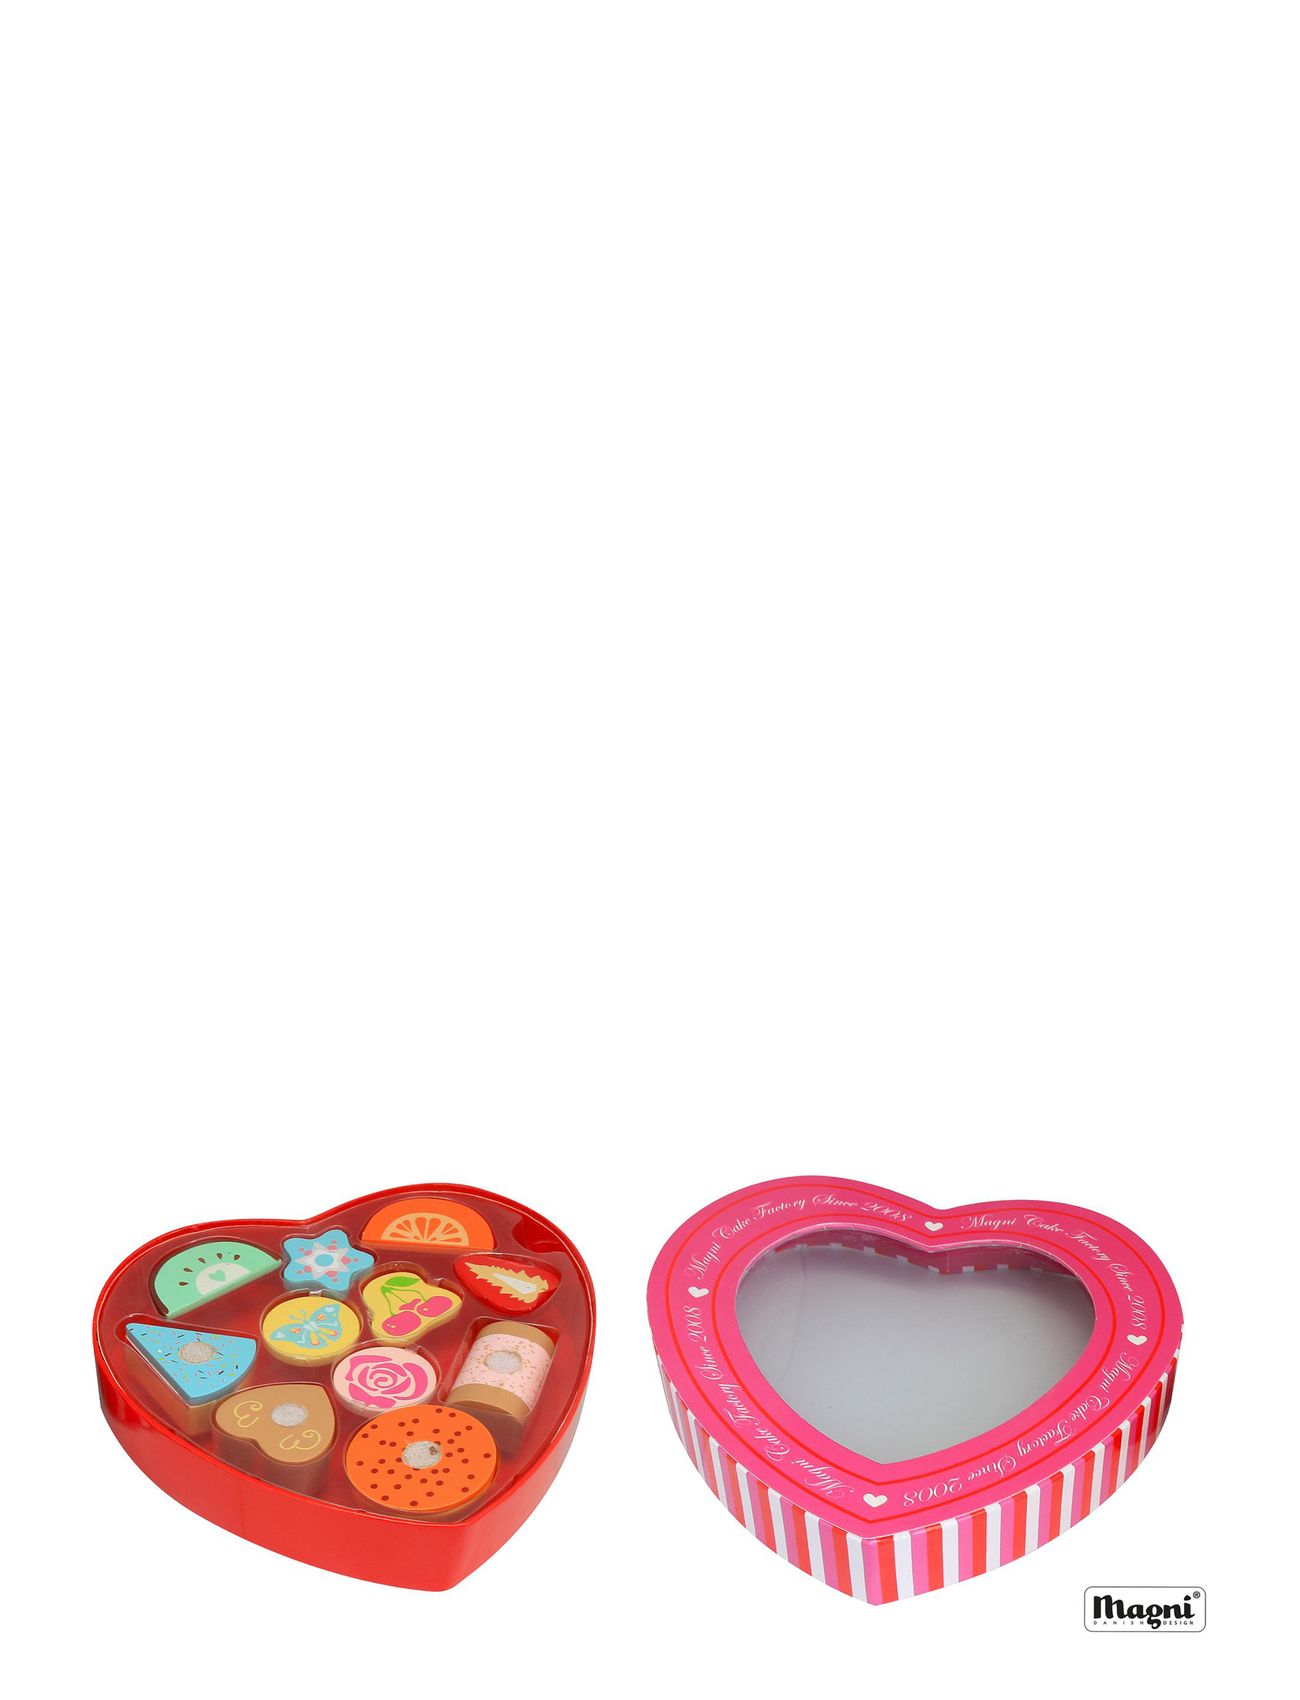 Small Cakes In The Heart Box Toys Toy Kitchen & Accessories Toy Food & Cakes Multi/patterned Magni Toys